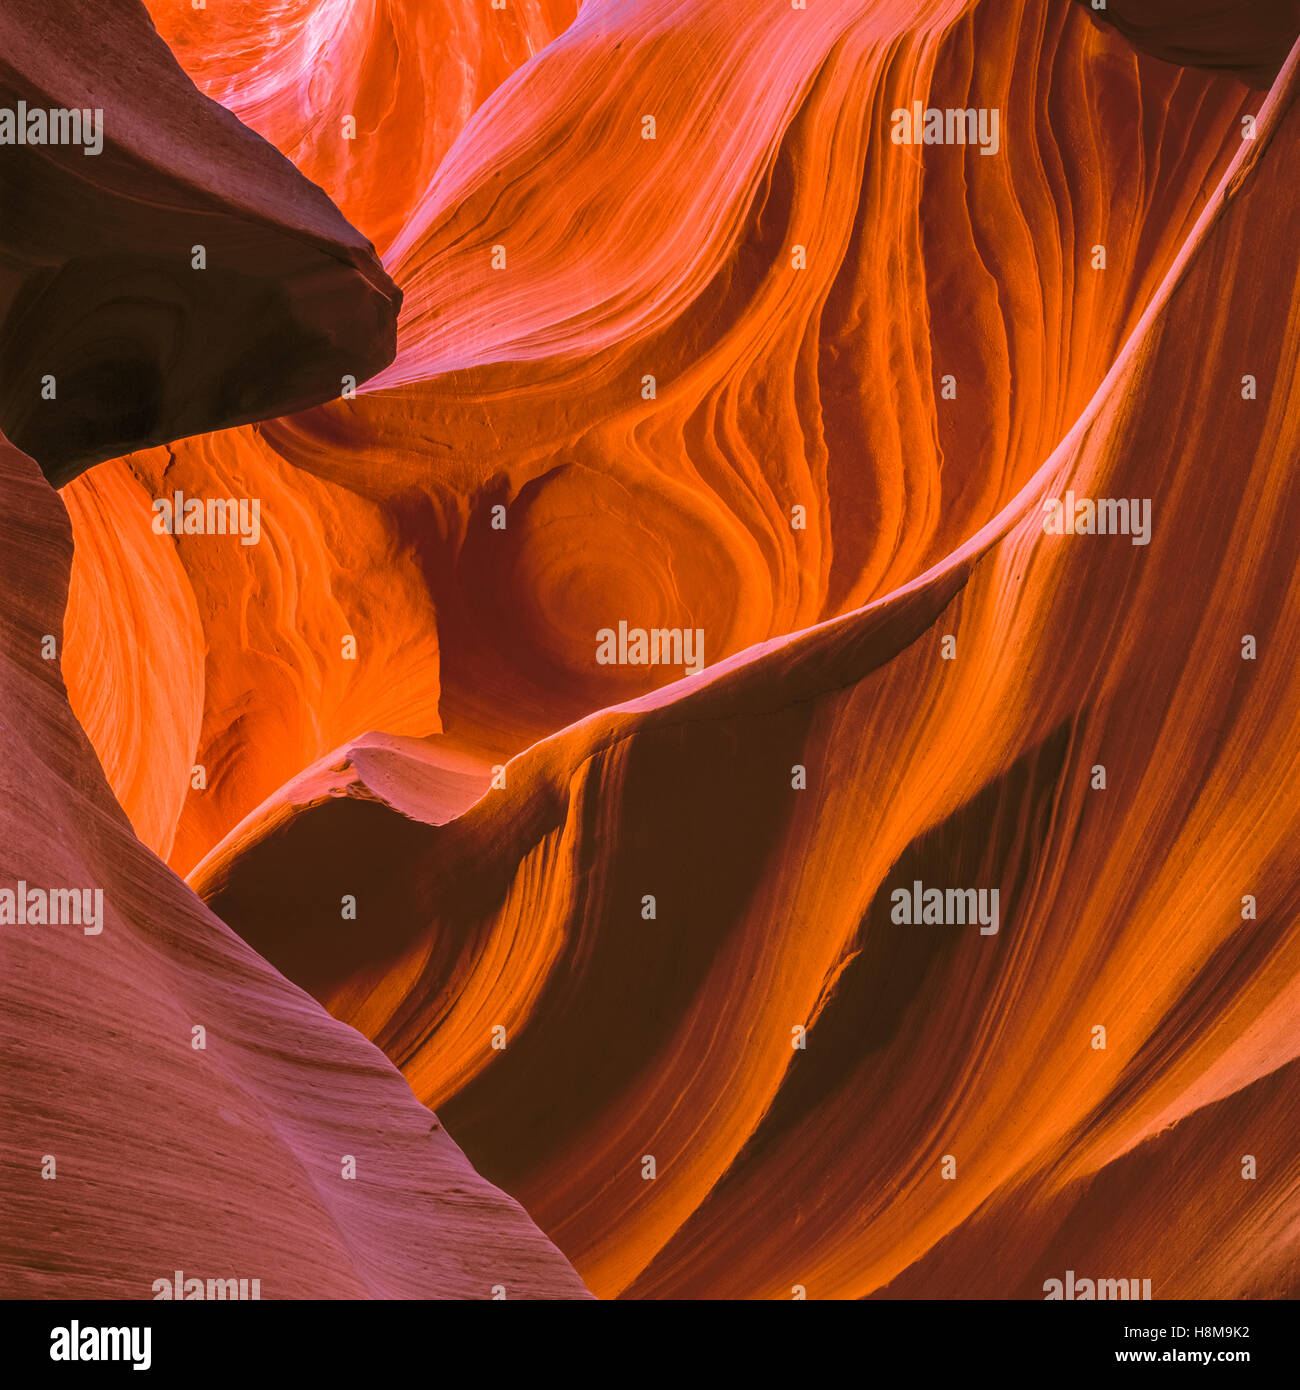 swirling sandstone formations in lower antelope canyon near page, arizona Stock Photo